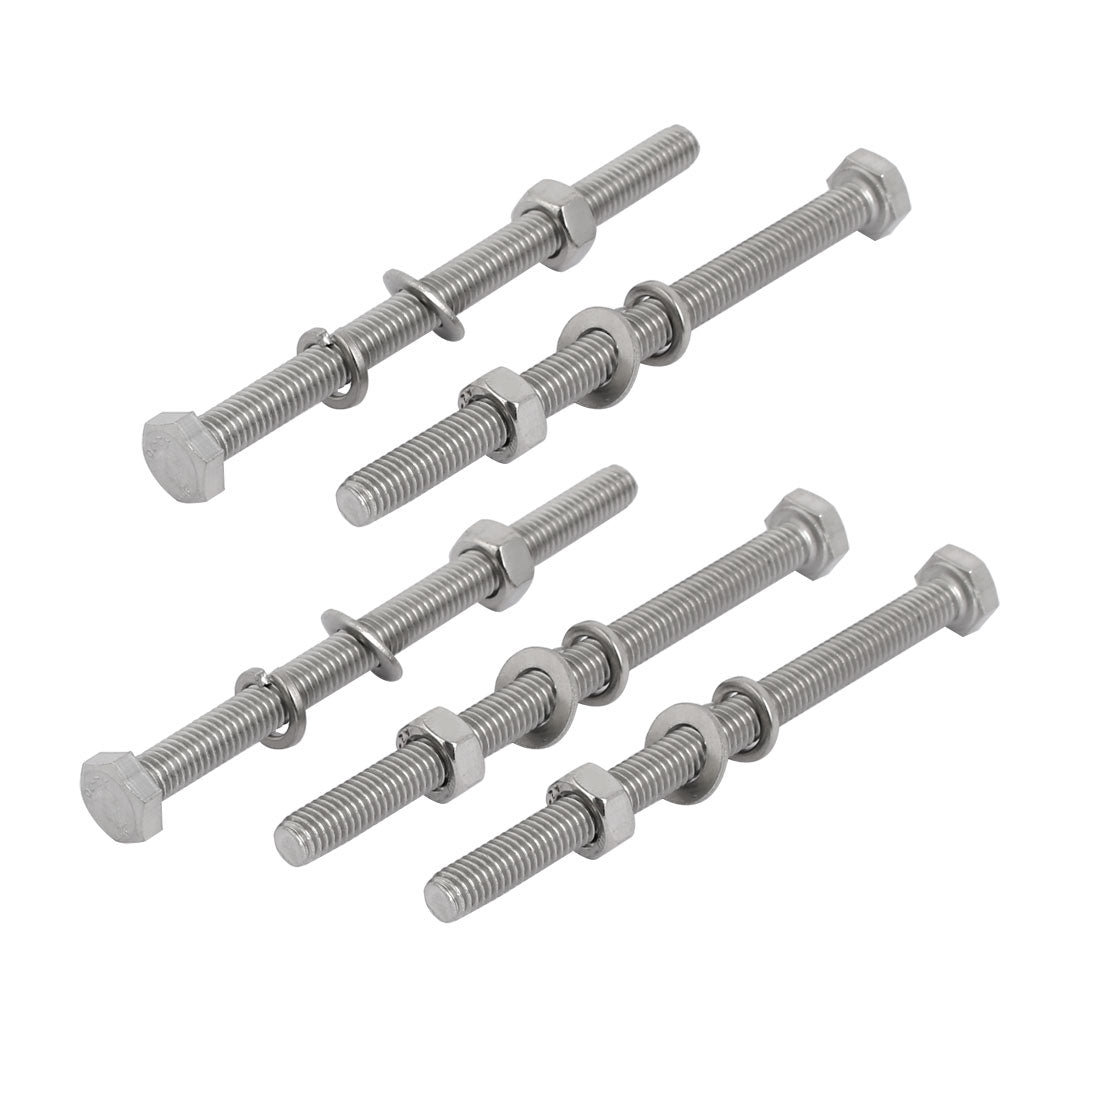 uxcell Uxcell 5pcs 304 Stainless Steel M6x90mm Hex Bolts w Nuts and Washers Assortment Kit